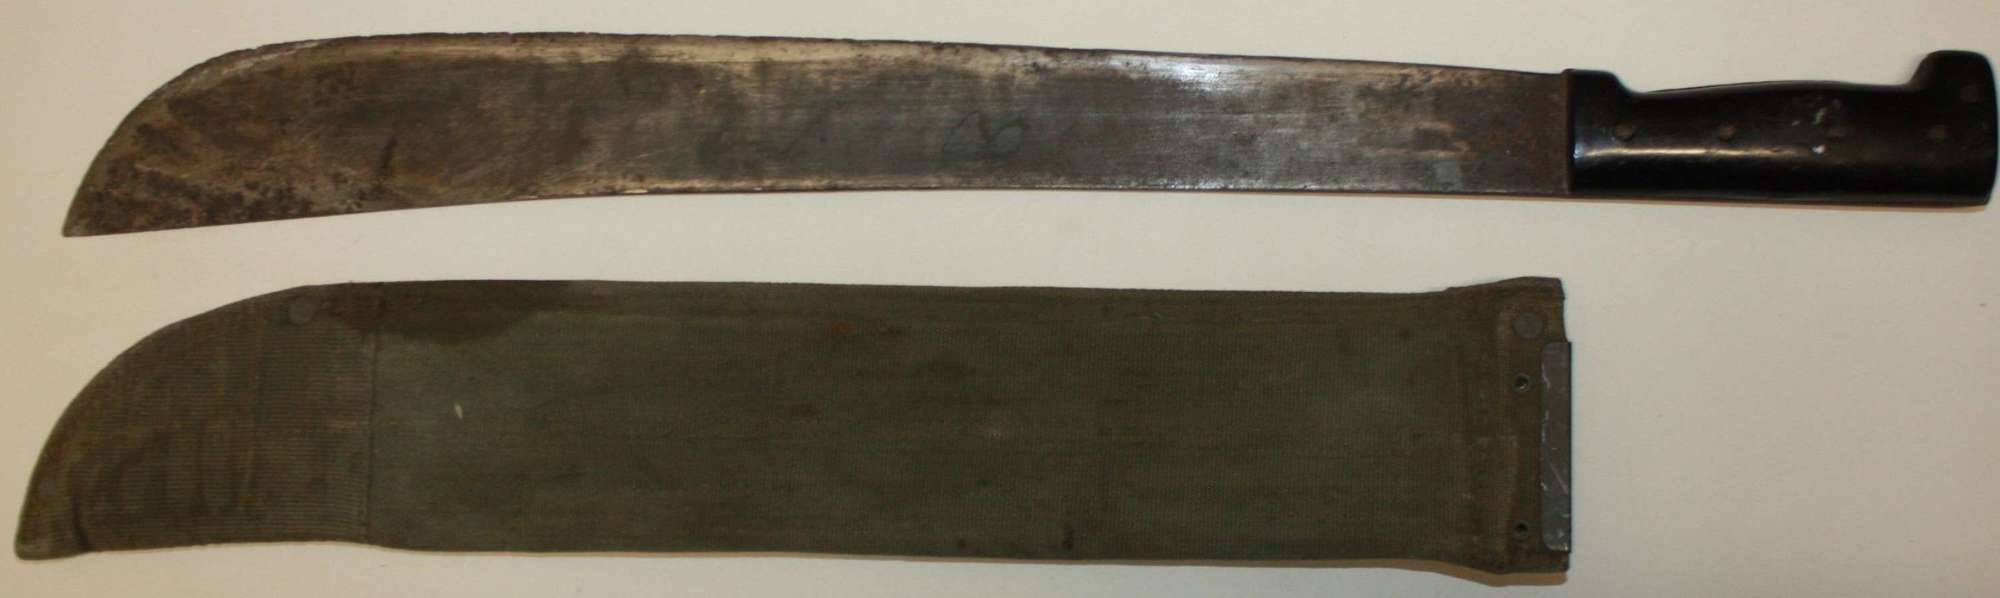 A GOOD CONDITION 1945 DATED 44 PATTERN WEBBING MACHETE  SCABARD